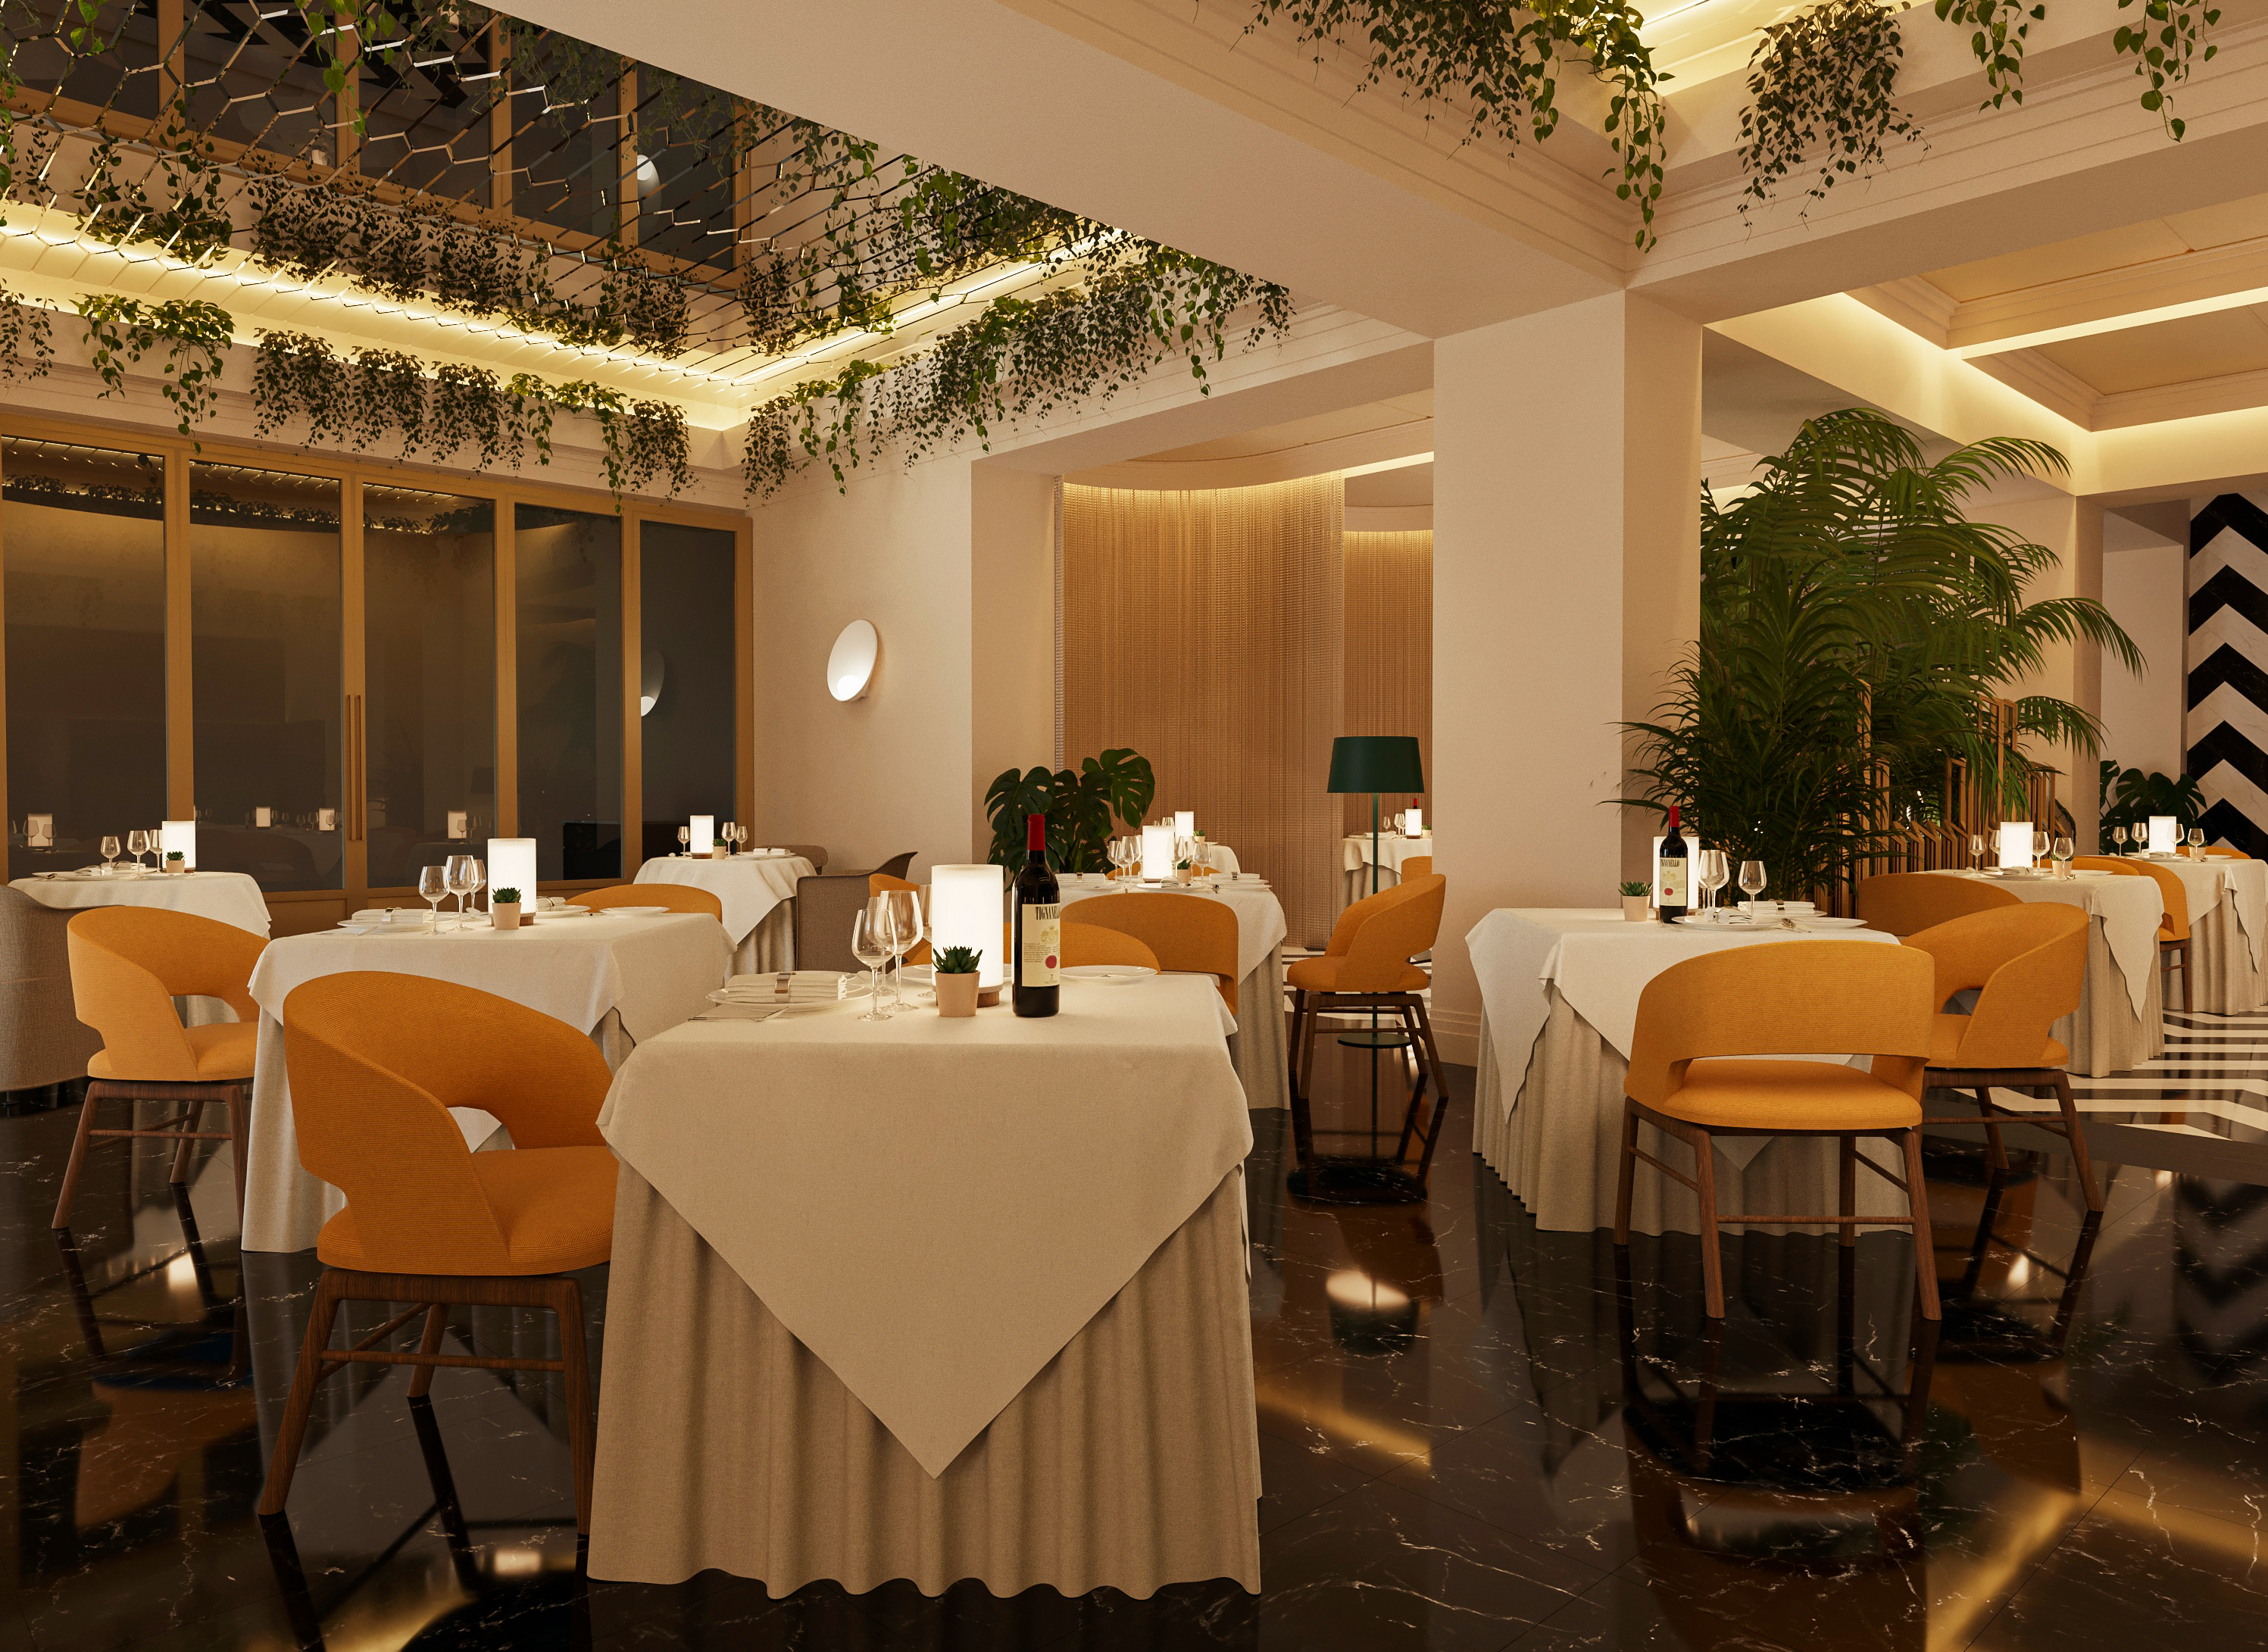 High end dining options for Excellence Club guests